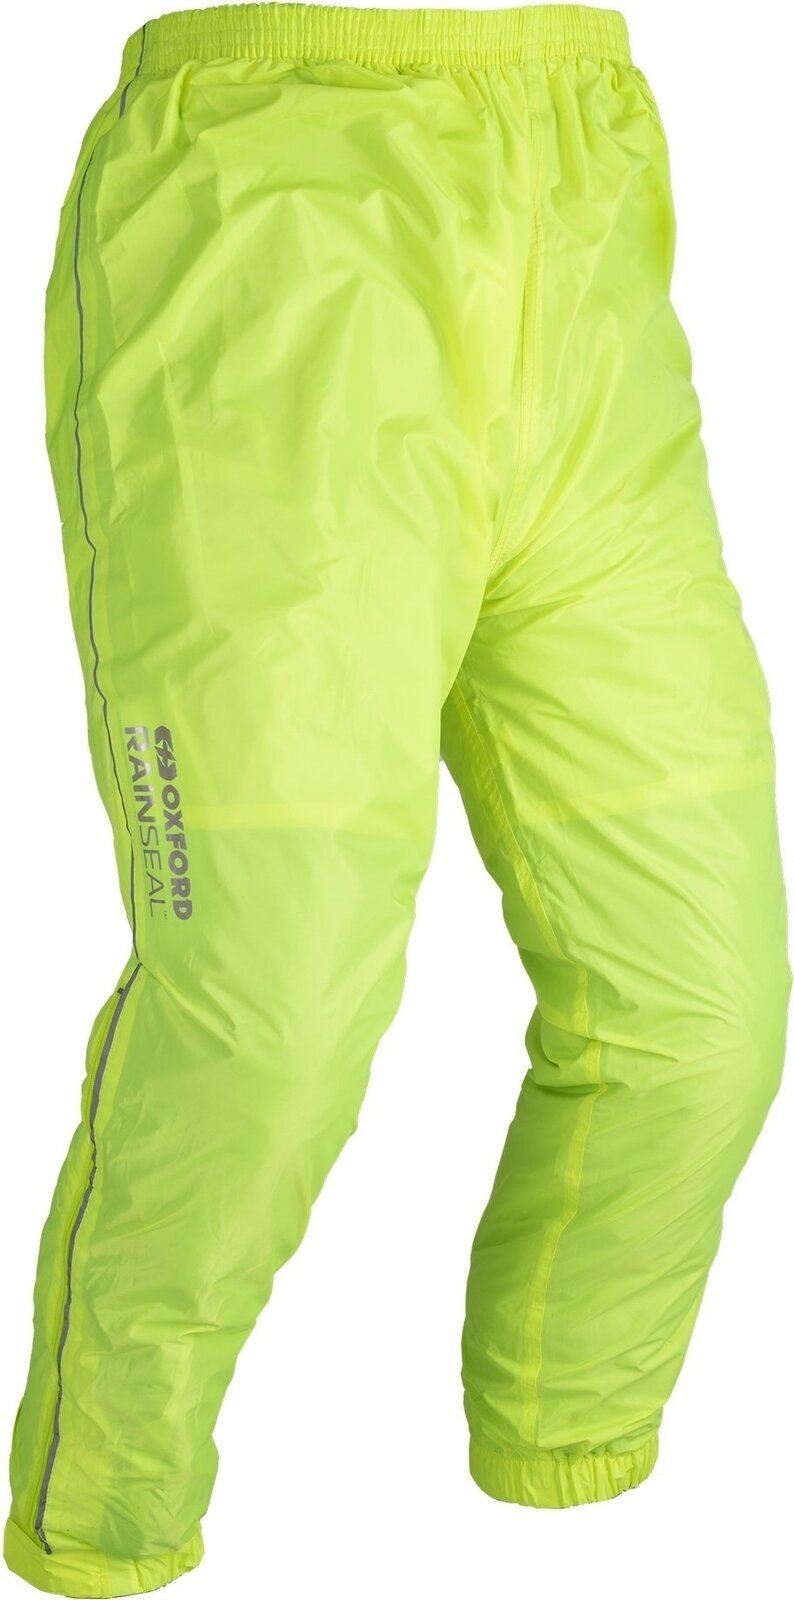 Motorcycle Rain Pants Oxford Rainseal Over Trousers Fluo 2XL